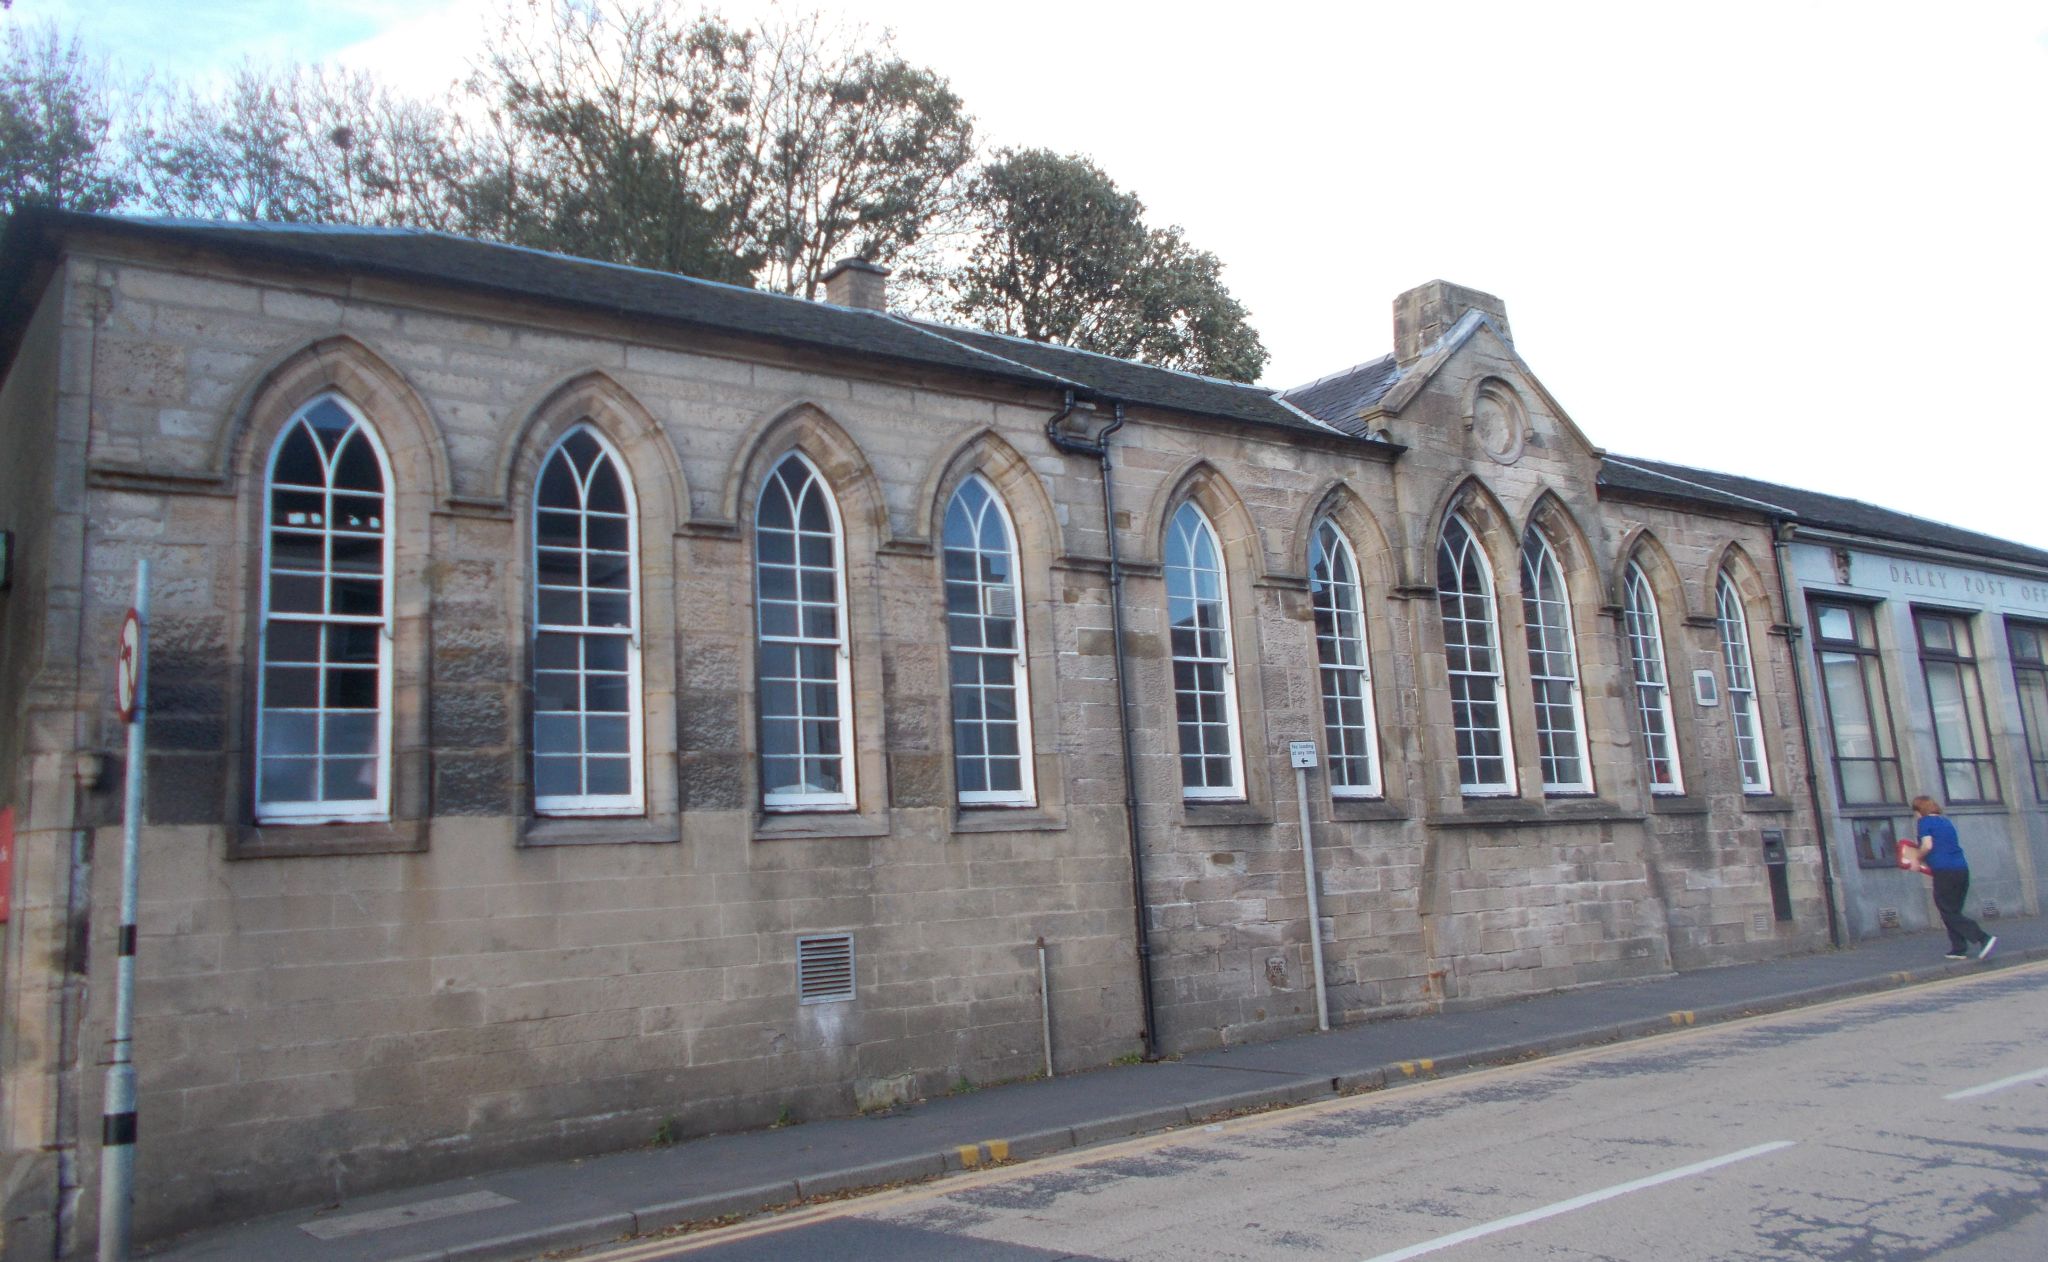 The Old Post Office Building in Dalry